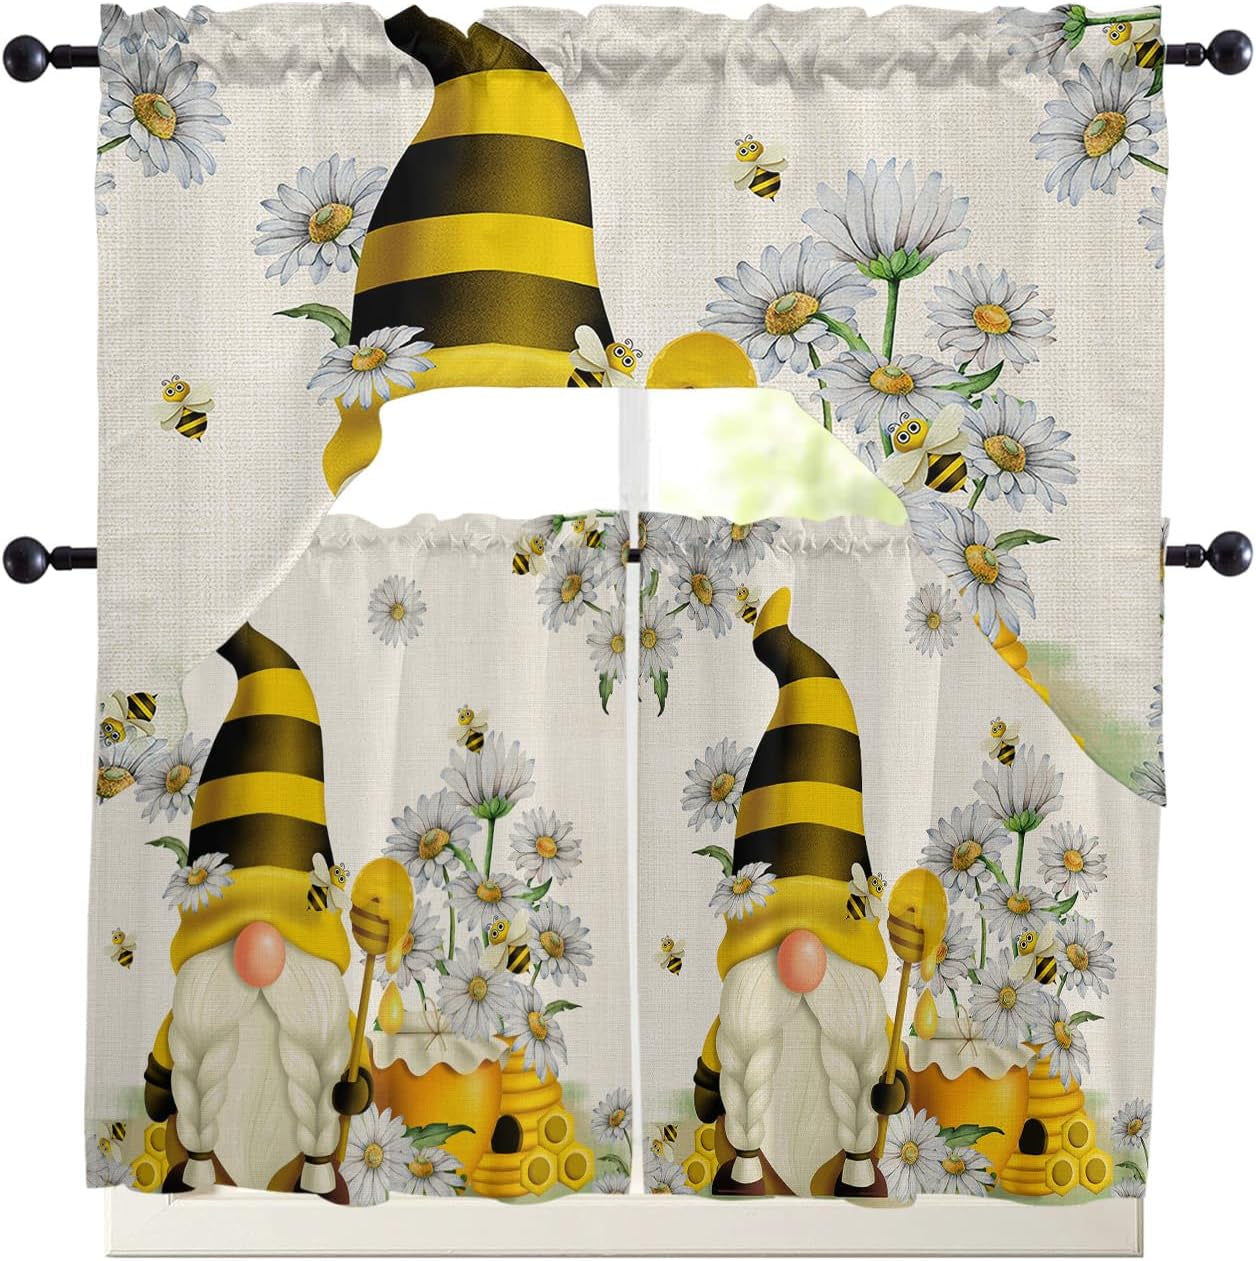 Cute Gnomes Honey Swag Kitchen Curtain Sets with Valance,3 Pieces Rod Pocket Curtain Drapes for Bedroom Bathroom Cafe Windows,Spring Honey Summer Bee Comb Daisy Floral 56''X36''&36''X27.5''X2Panels